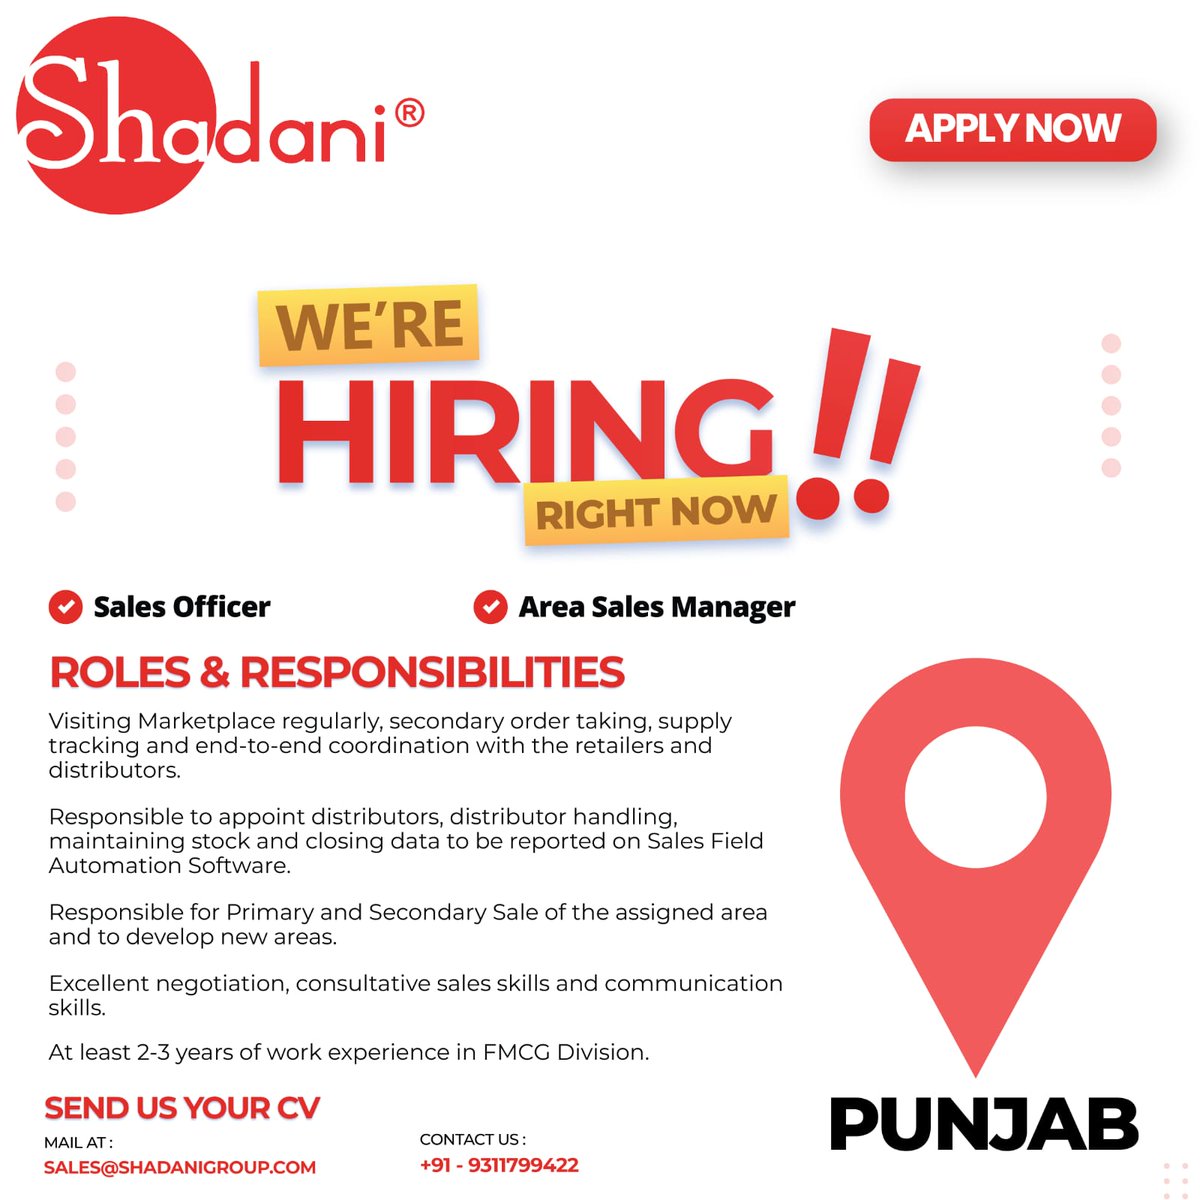 Elevate your career with us! Positions available for Sales Officers and Area Sales Managers in Punjab.

#hiringsalesofficer #hiringareasalesmanager #SalesJobs #salesopportunity #punjabjobs #salescareer #joinourteam #punjabcareers #salesvacancy #careeropportunity #salesexecutive